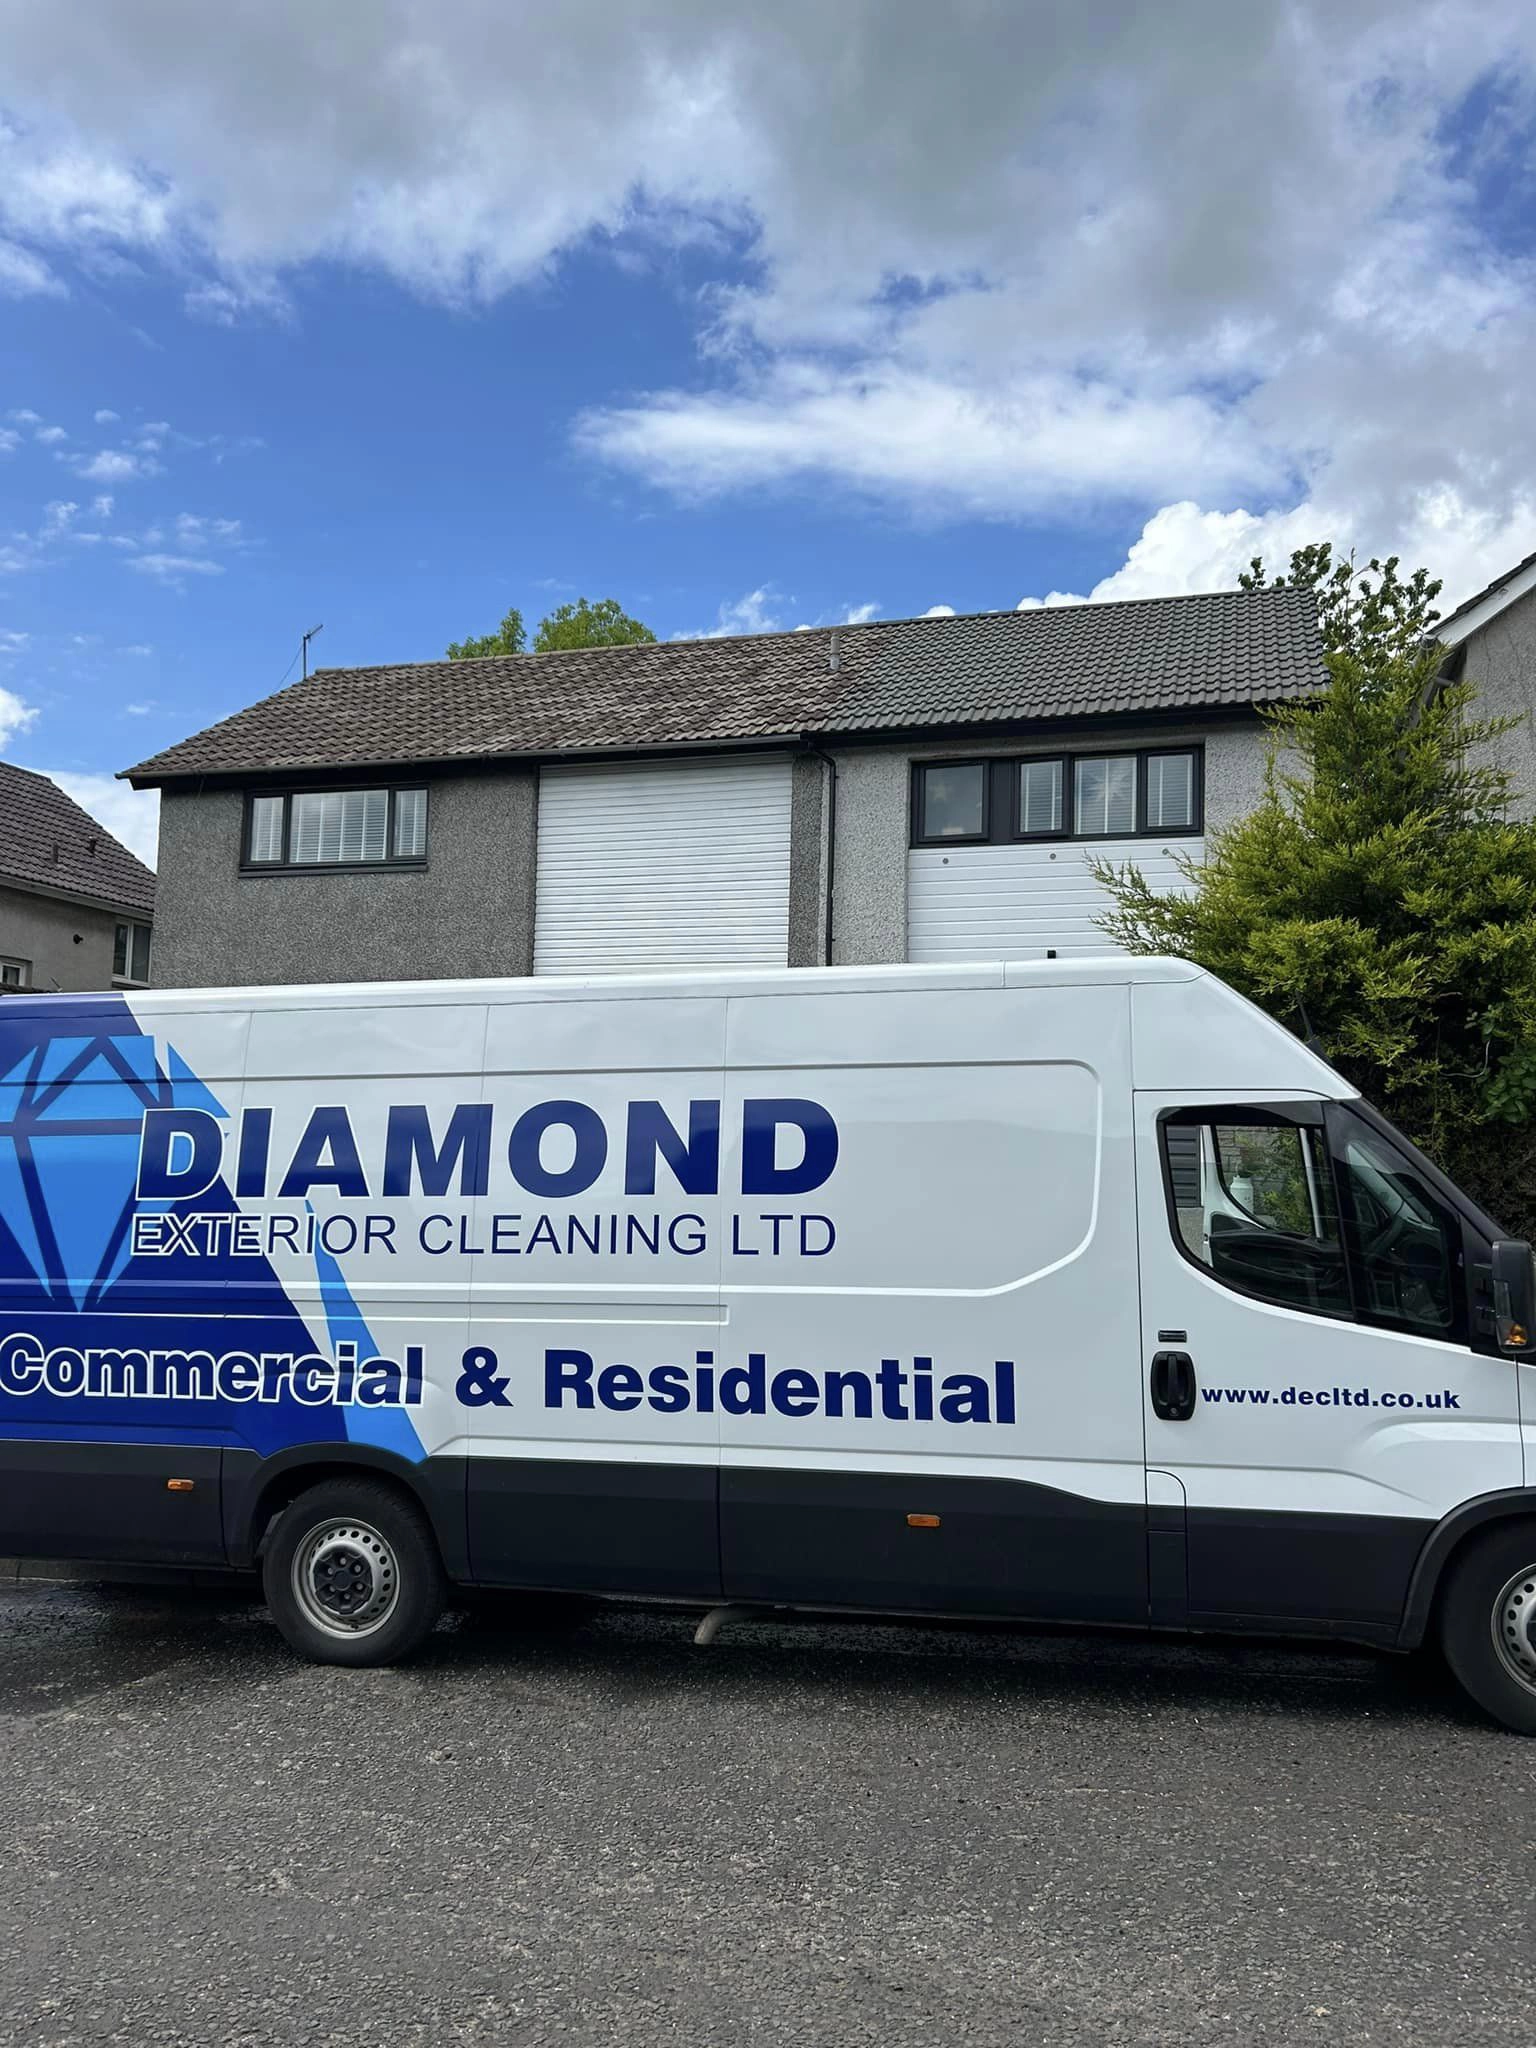 Diamond Exterior Cleaning Ltd Commercial & Residential